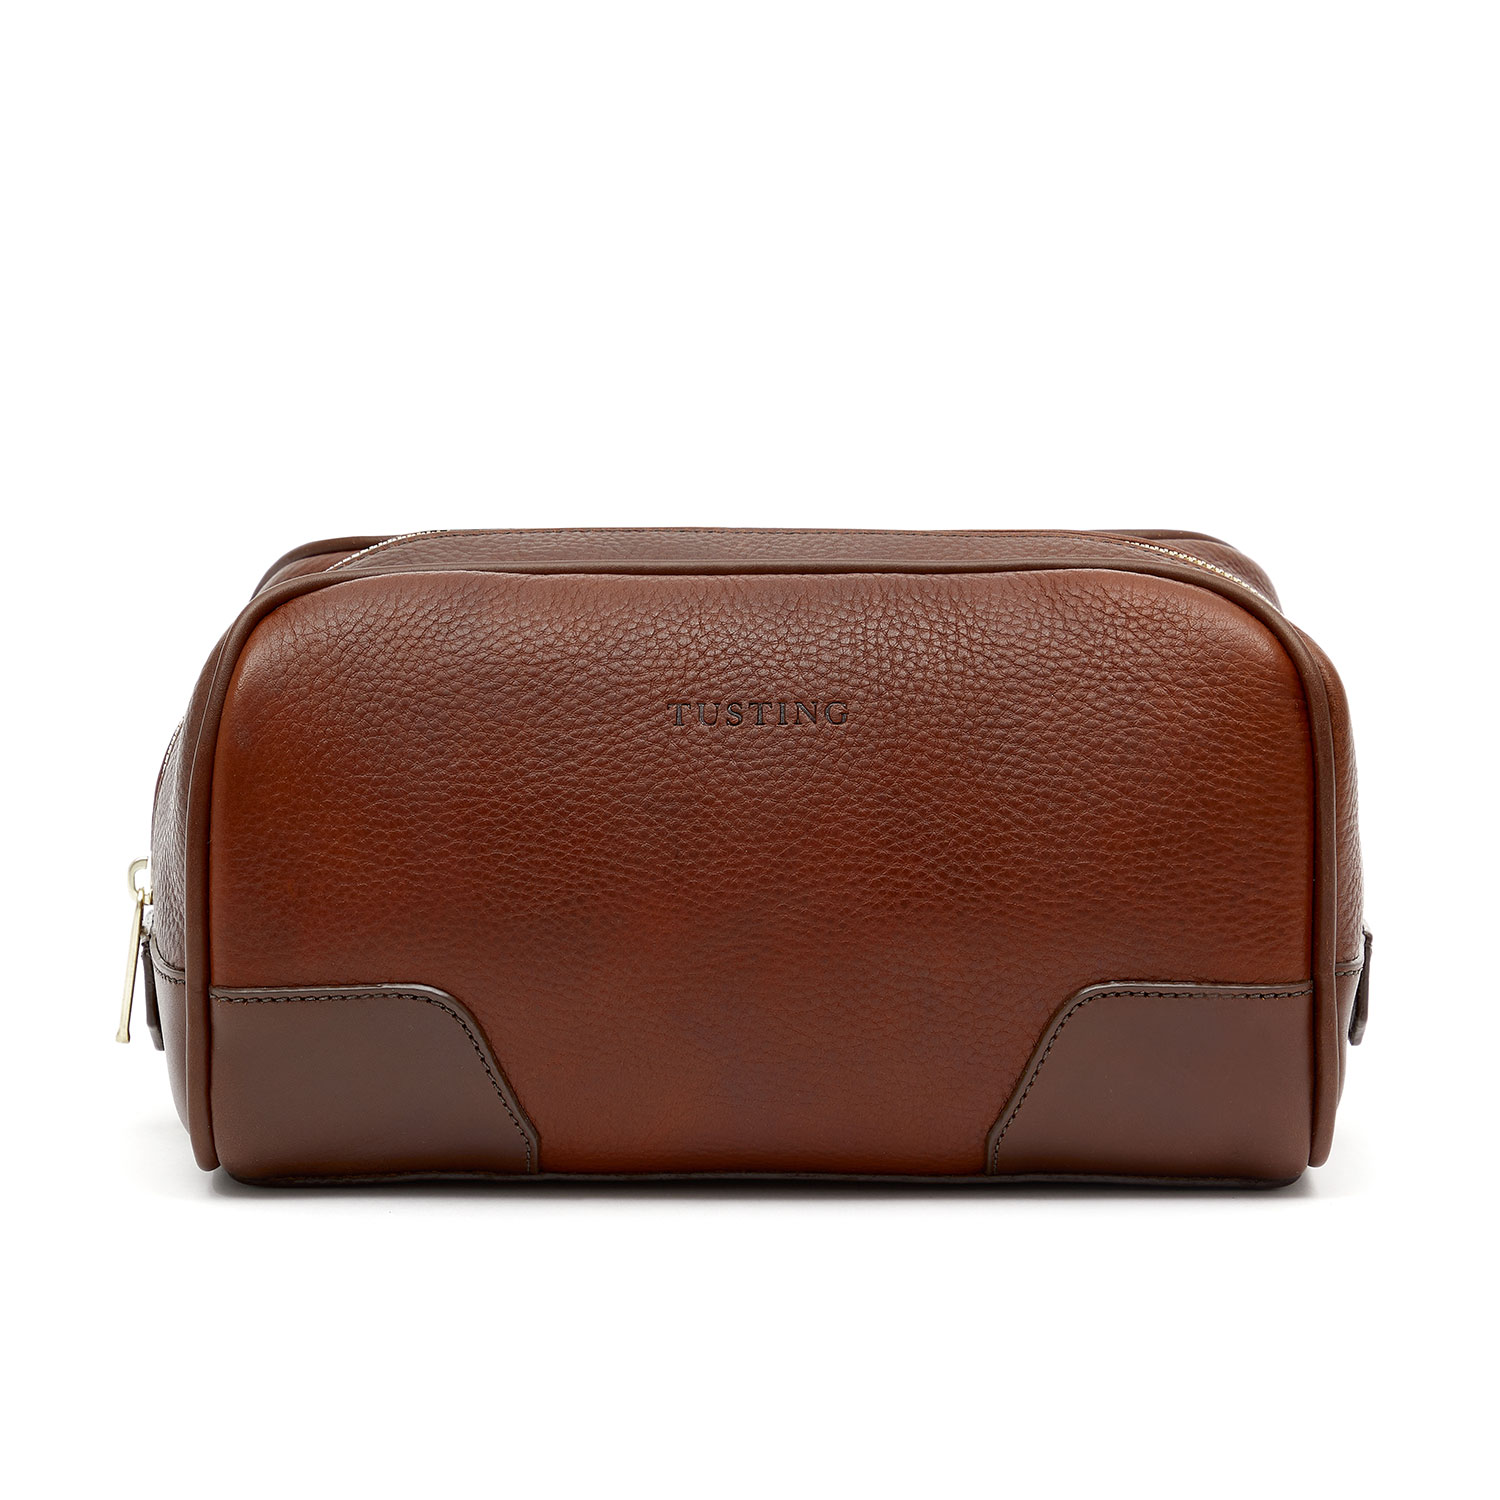 Hove Leather Washbag | Made in England by Tusting